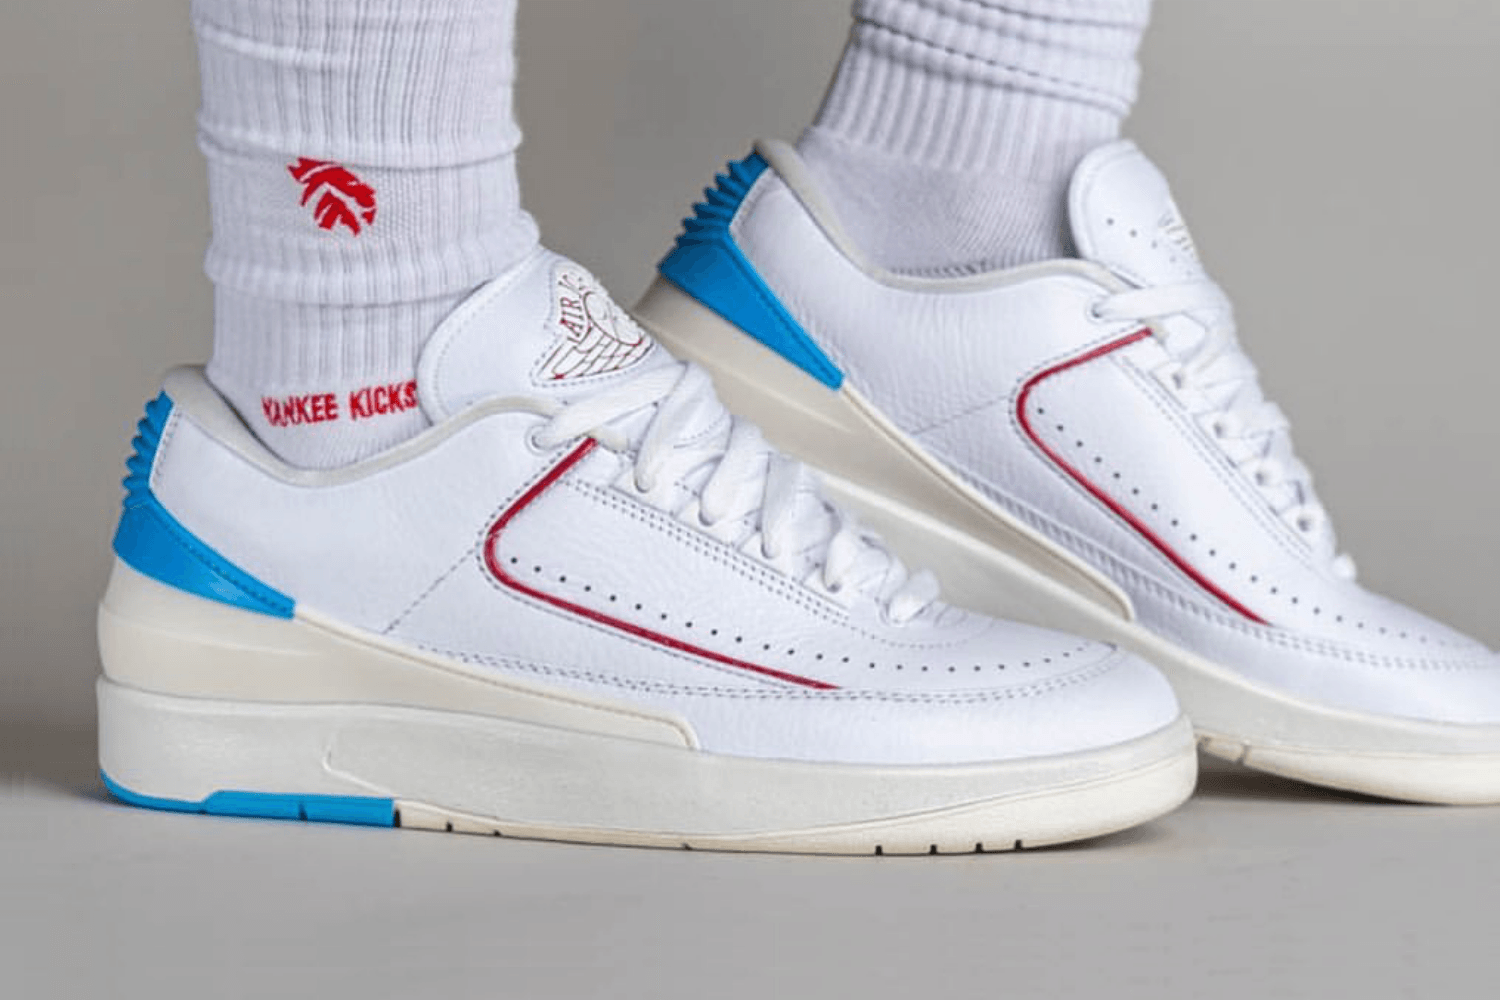 Check out the details of the Air Jordan 2 Low 'UNC to CHI'